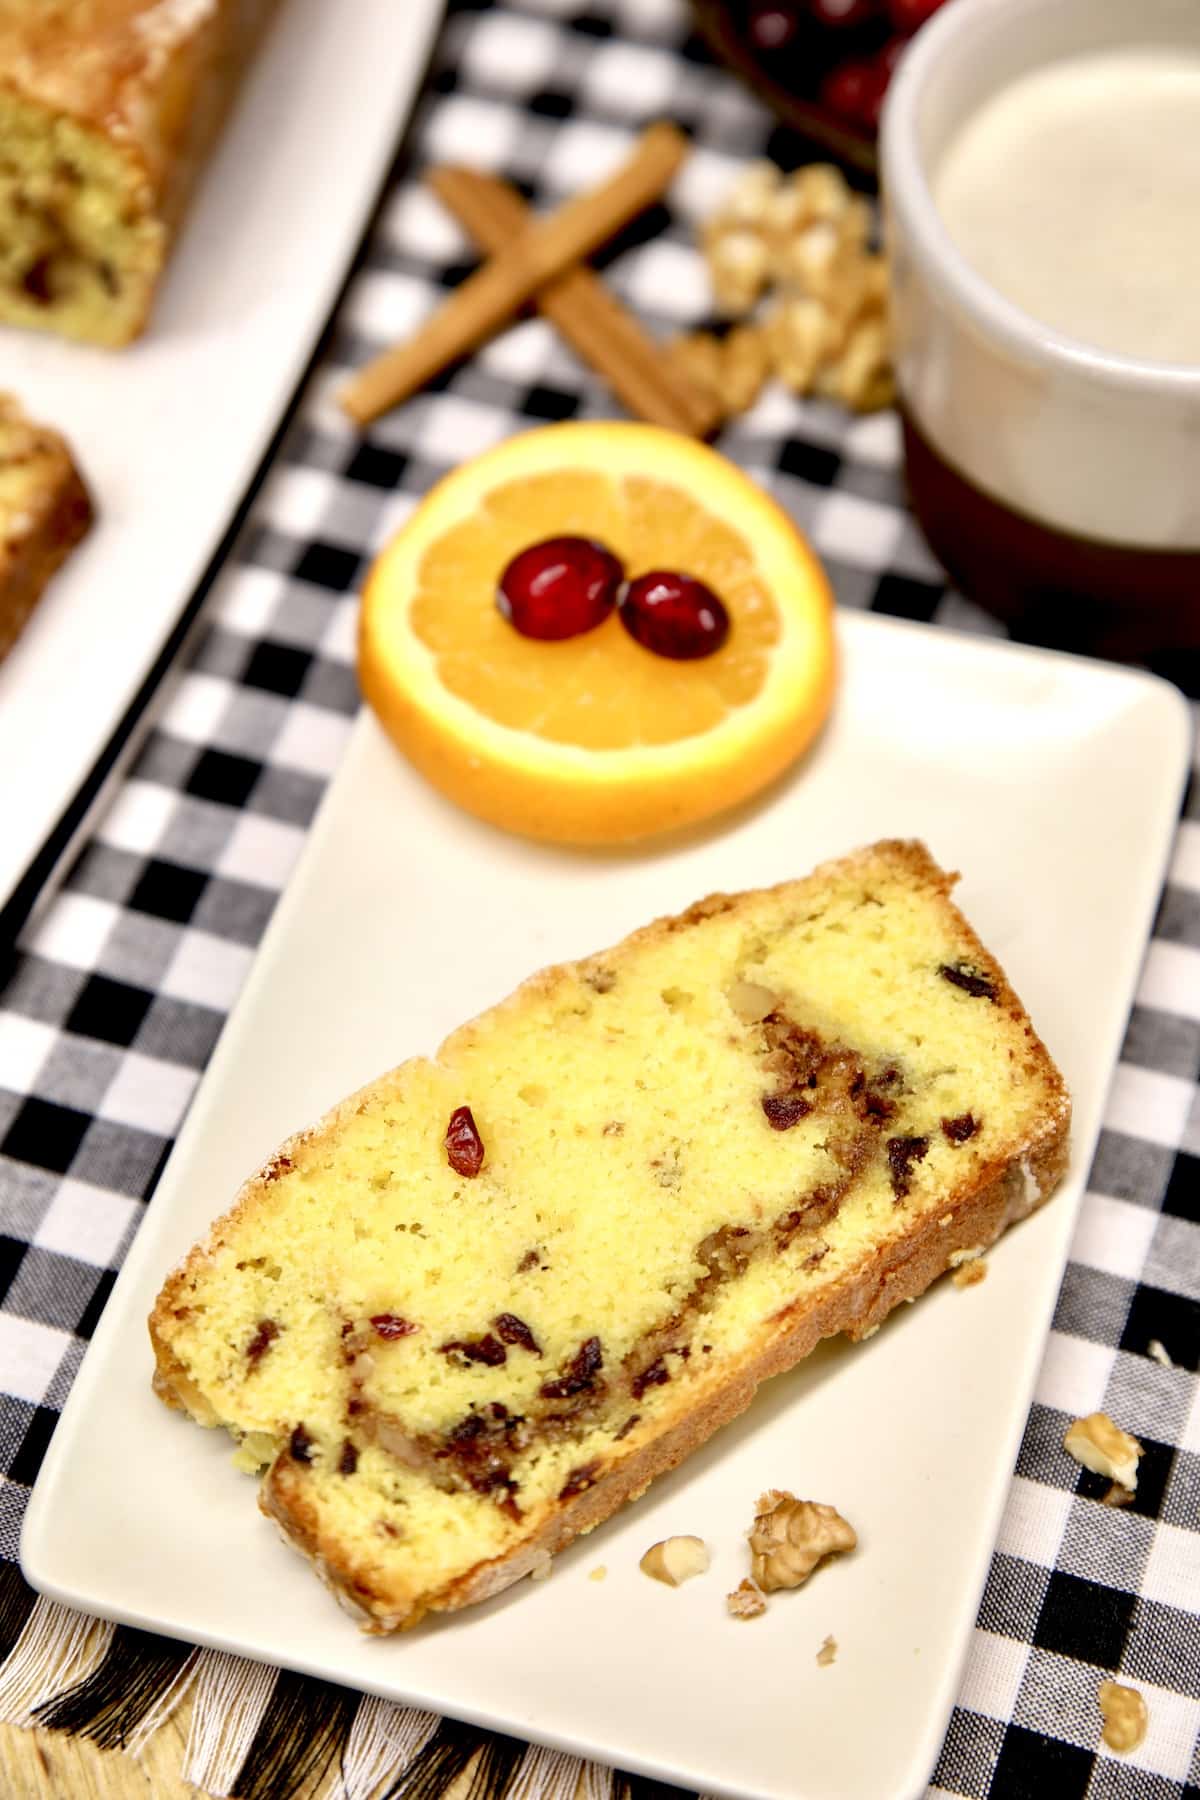 Plate with slice of cranberry cake, orange slices and fresh cranberries.